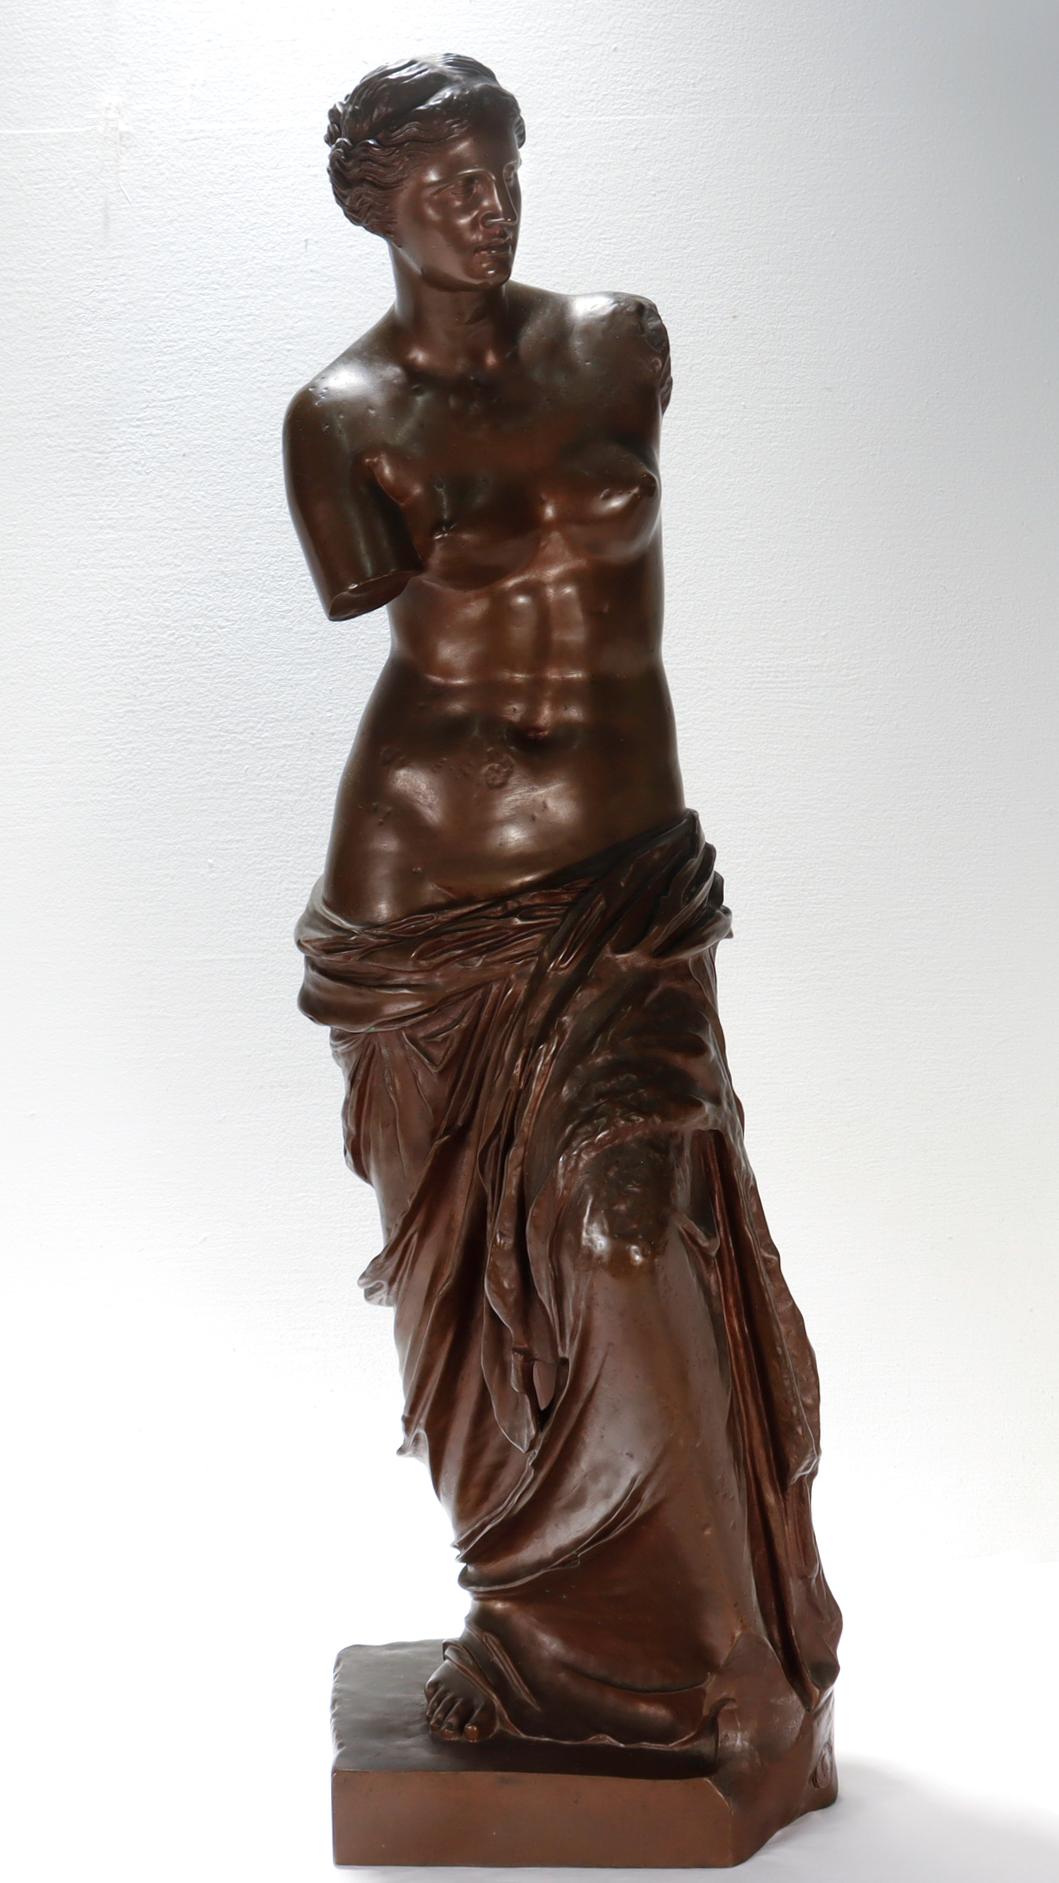 A fine antique bronze sculputre.

Depicting the Venus de Milo.

After the ancient model by Alexandros of Antioch.

Bearing an Achille Collas reduction seal and a Barbedienne mark.

Published in France at the end of the 19th Century by Ferdinand